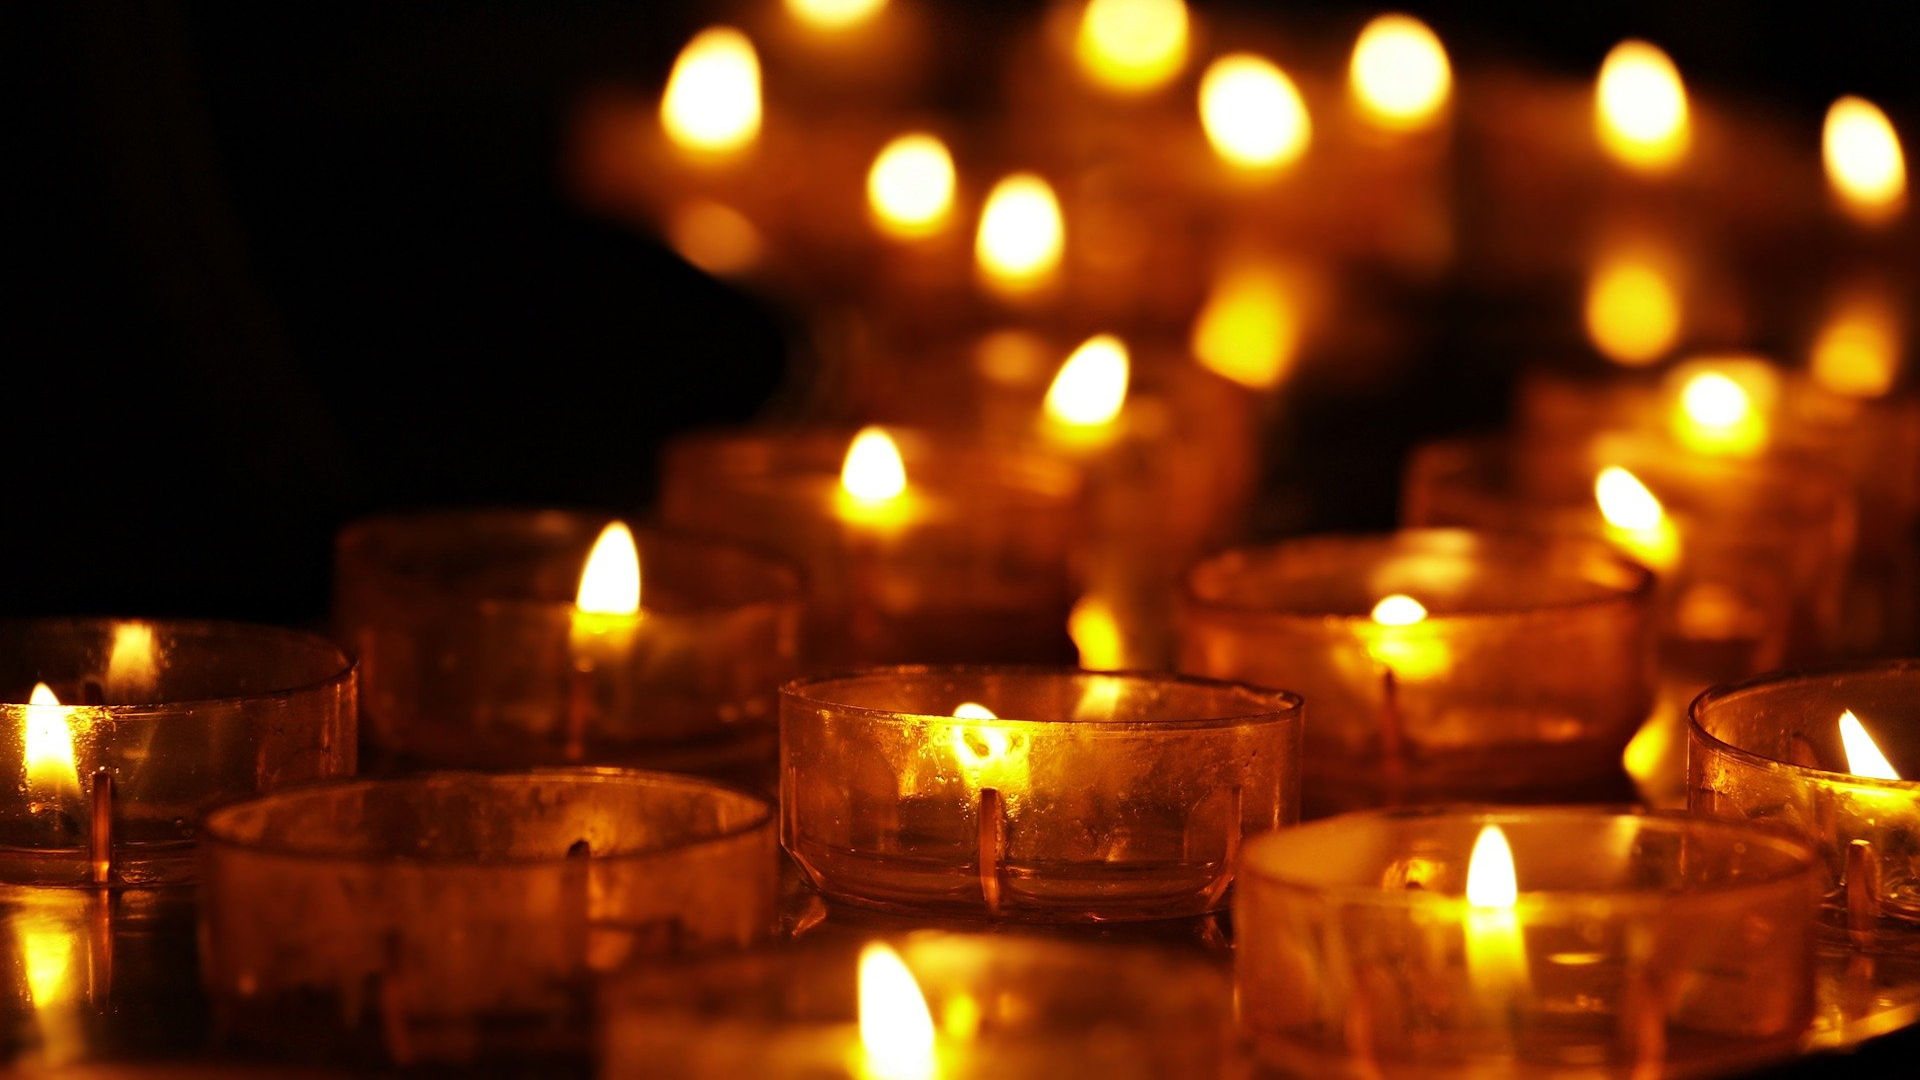 Candles. Image credit: S. Hermann & F. Richter from Pixabay.